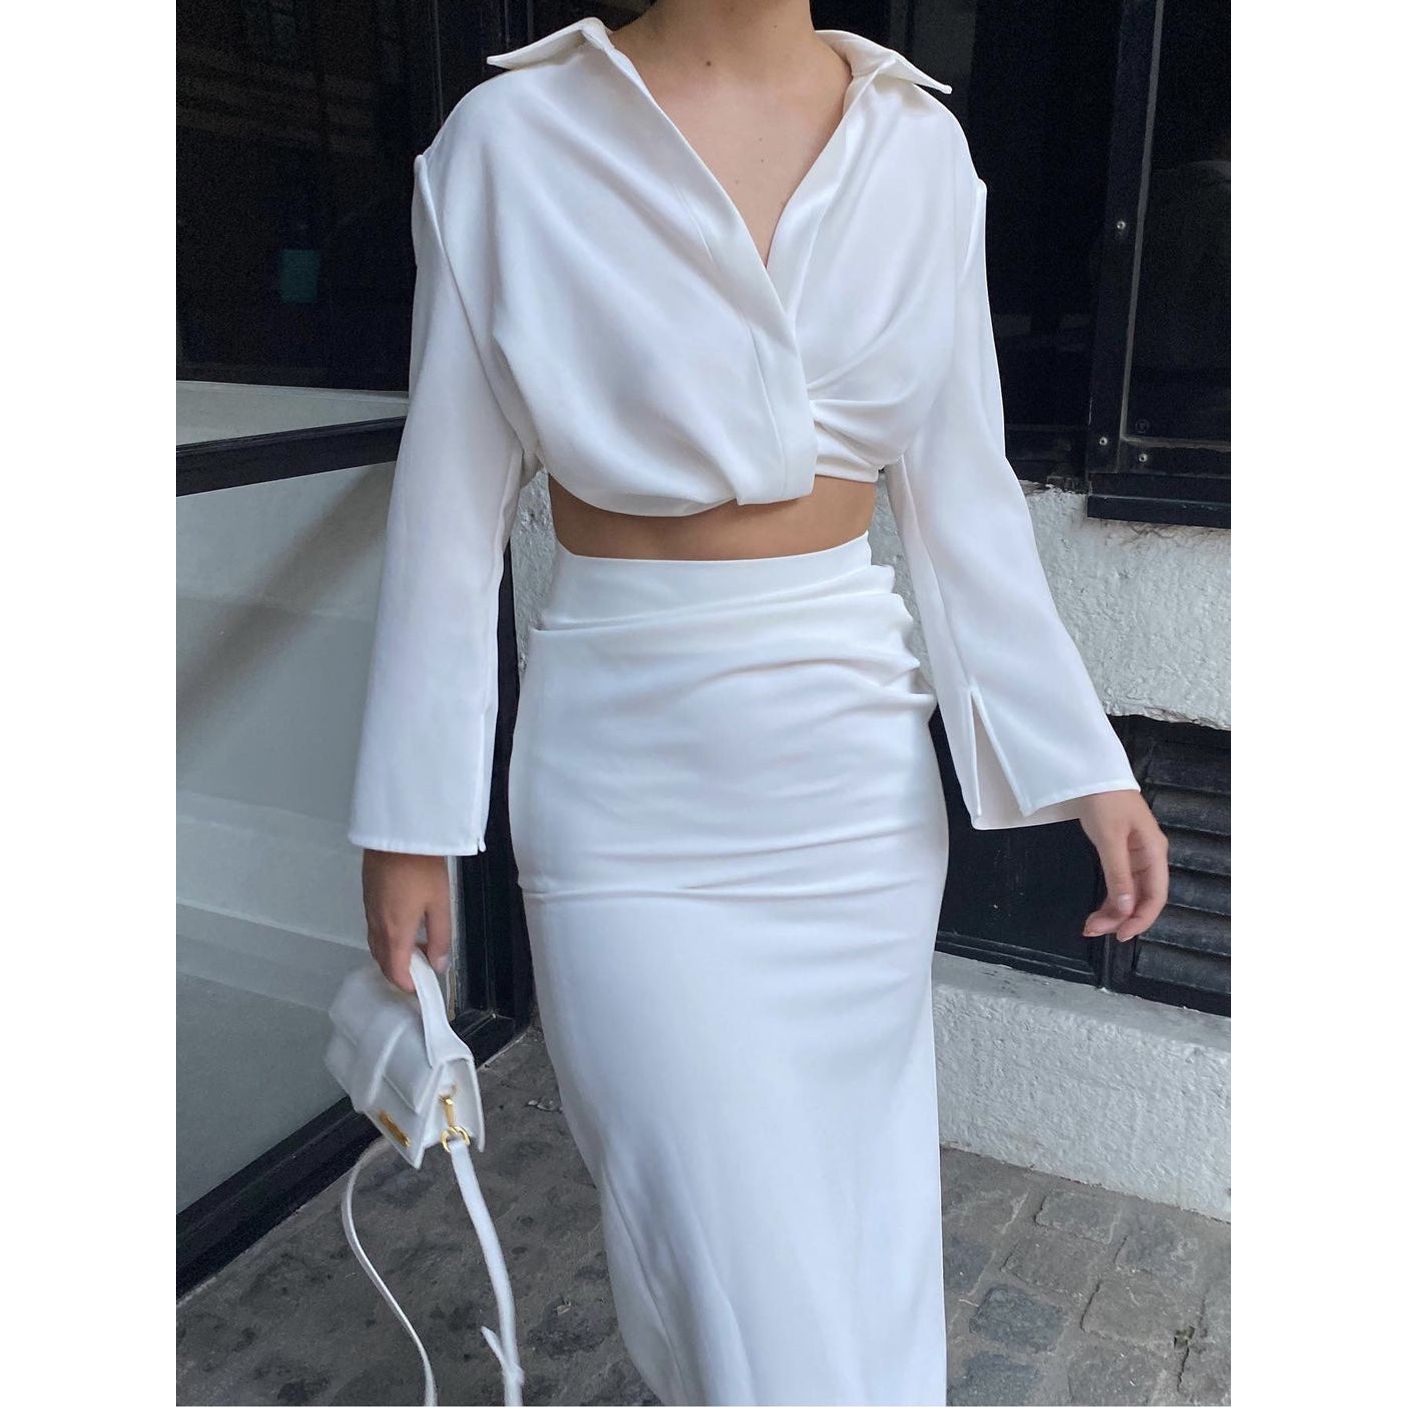 Buy Online Premimum Quality, Trendy and Highly Comfortable New Skirts Dress High End  Suits - FEYONAS